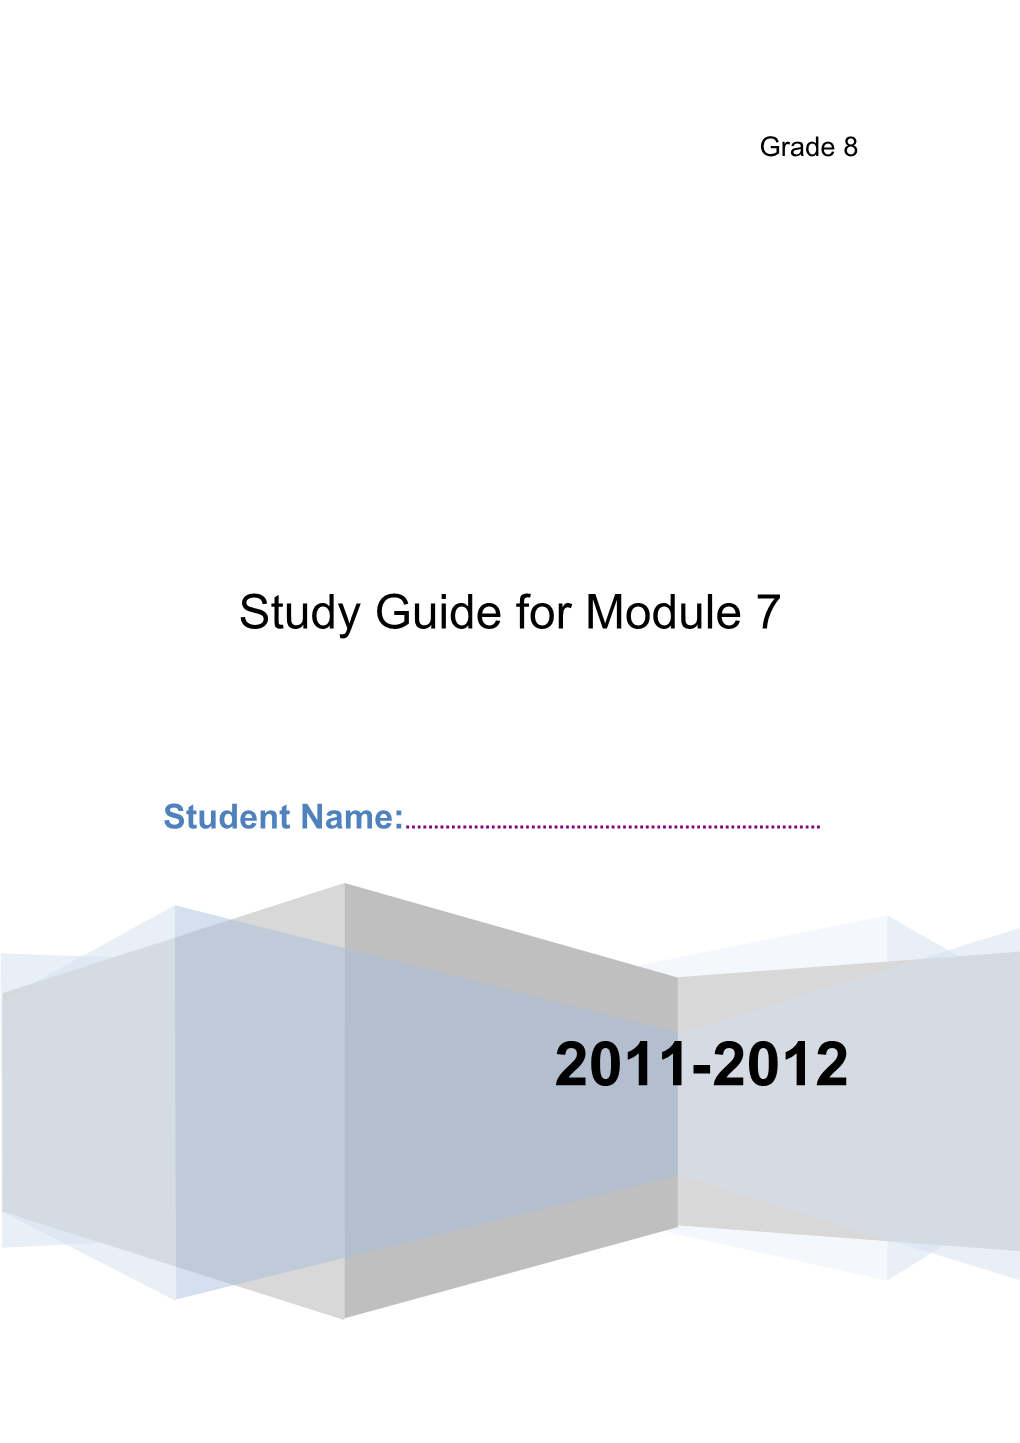 Study Guide for Module 7